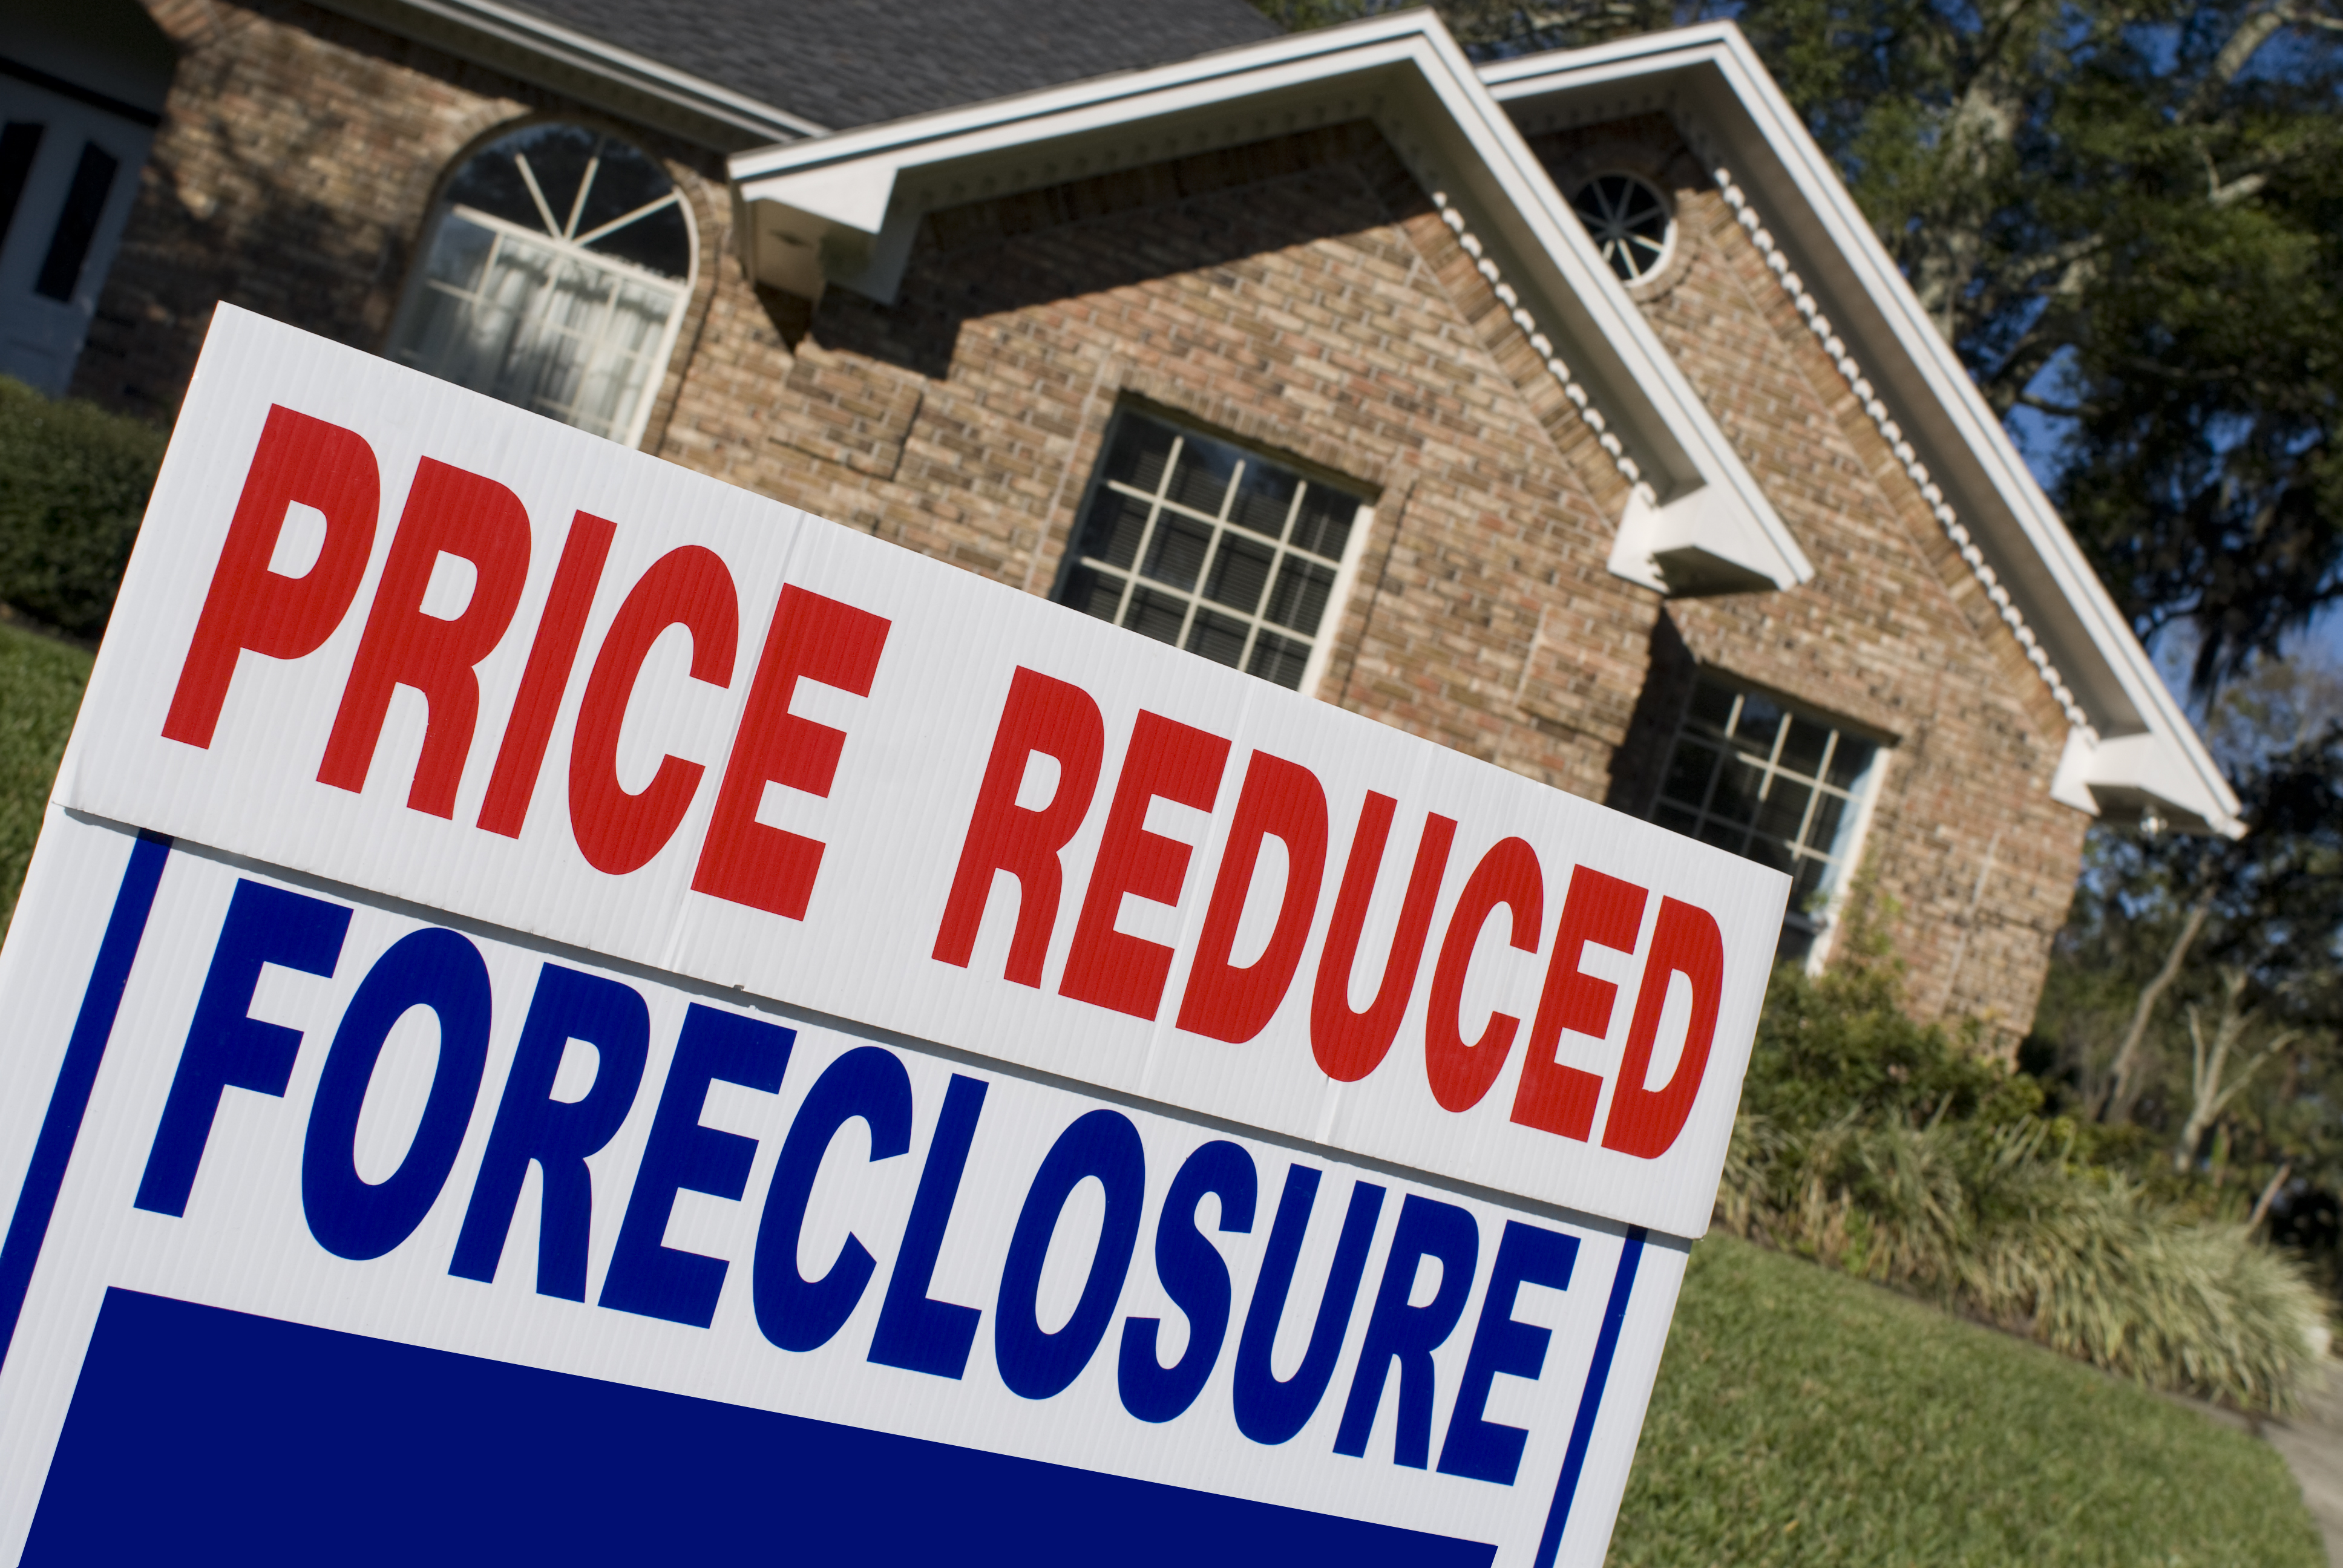 Reduce prices. Foreclosed Homes. Foreclosed Homes in Baltimore. Buy back House after Foreclosure. Foreclosed Homes Missoula MT.